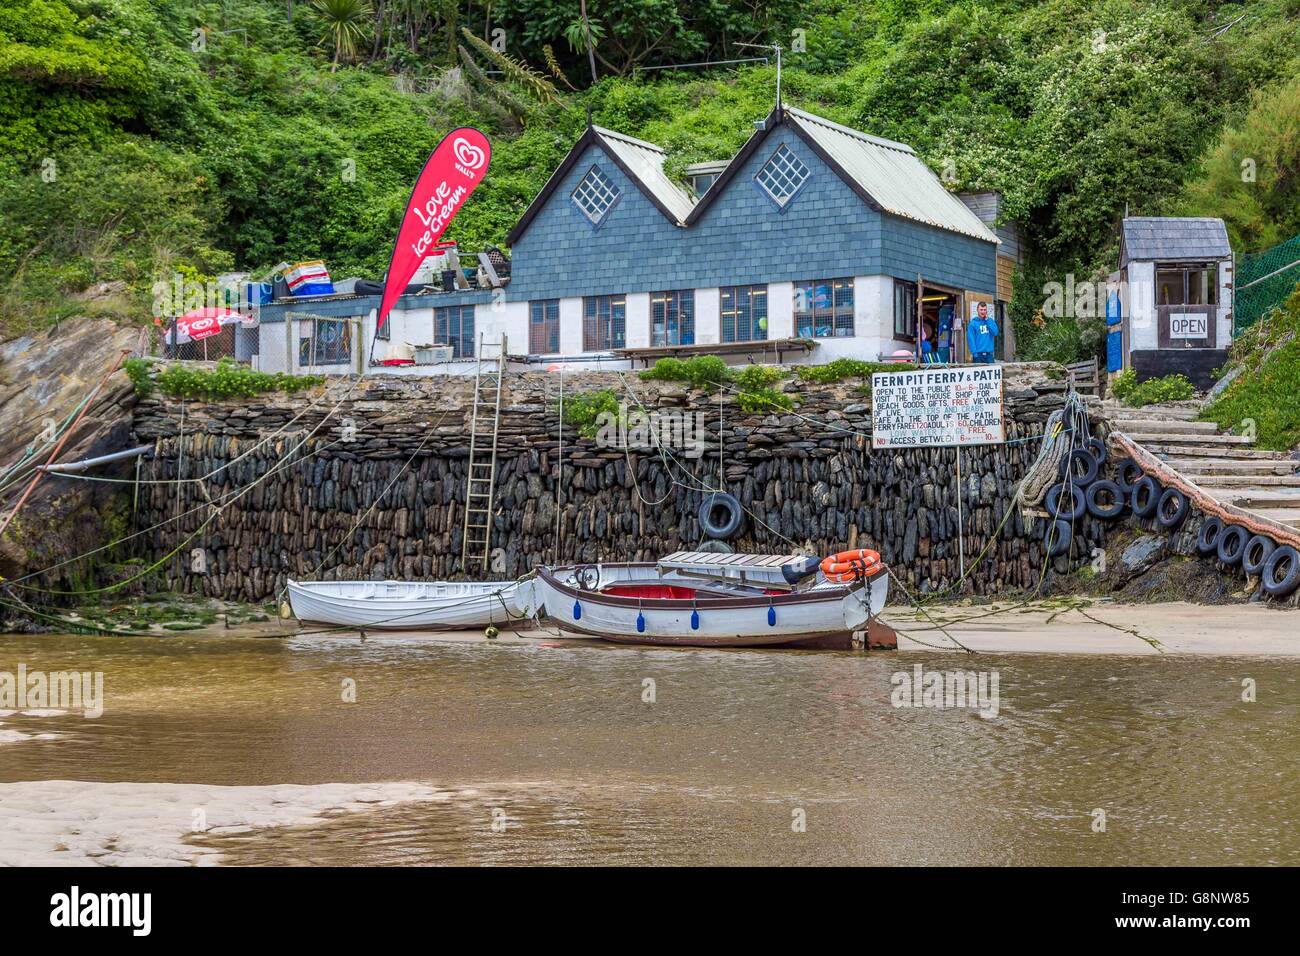 A boat house with boats on the river Gannel estuary, Crantock Beach, near Newquay in Cornwall, UK. Stock Photo